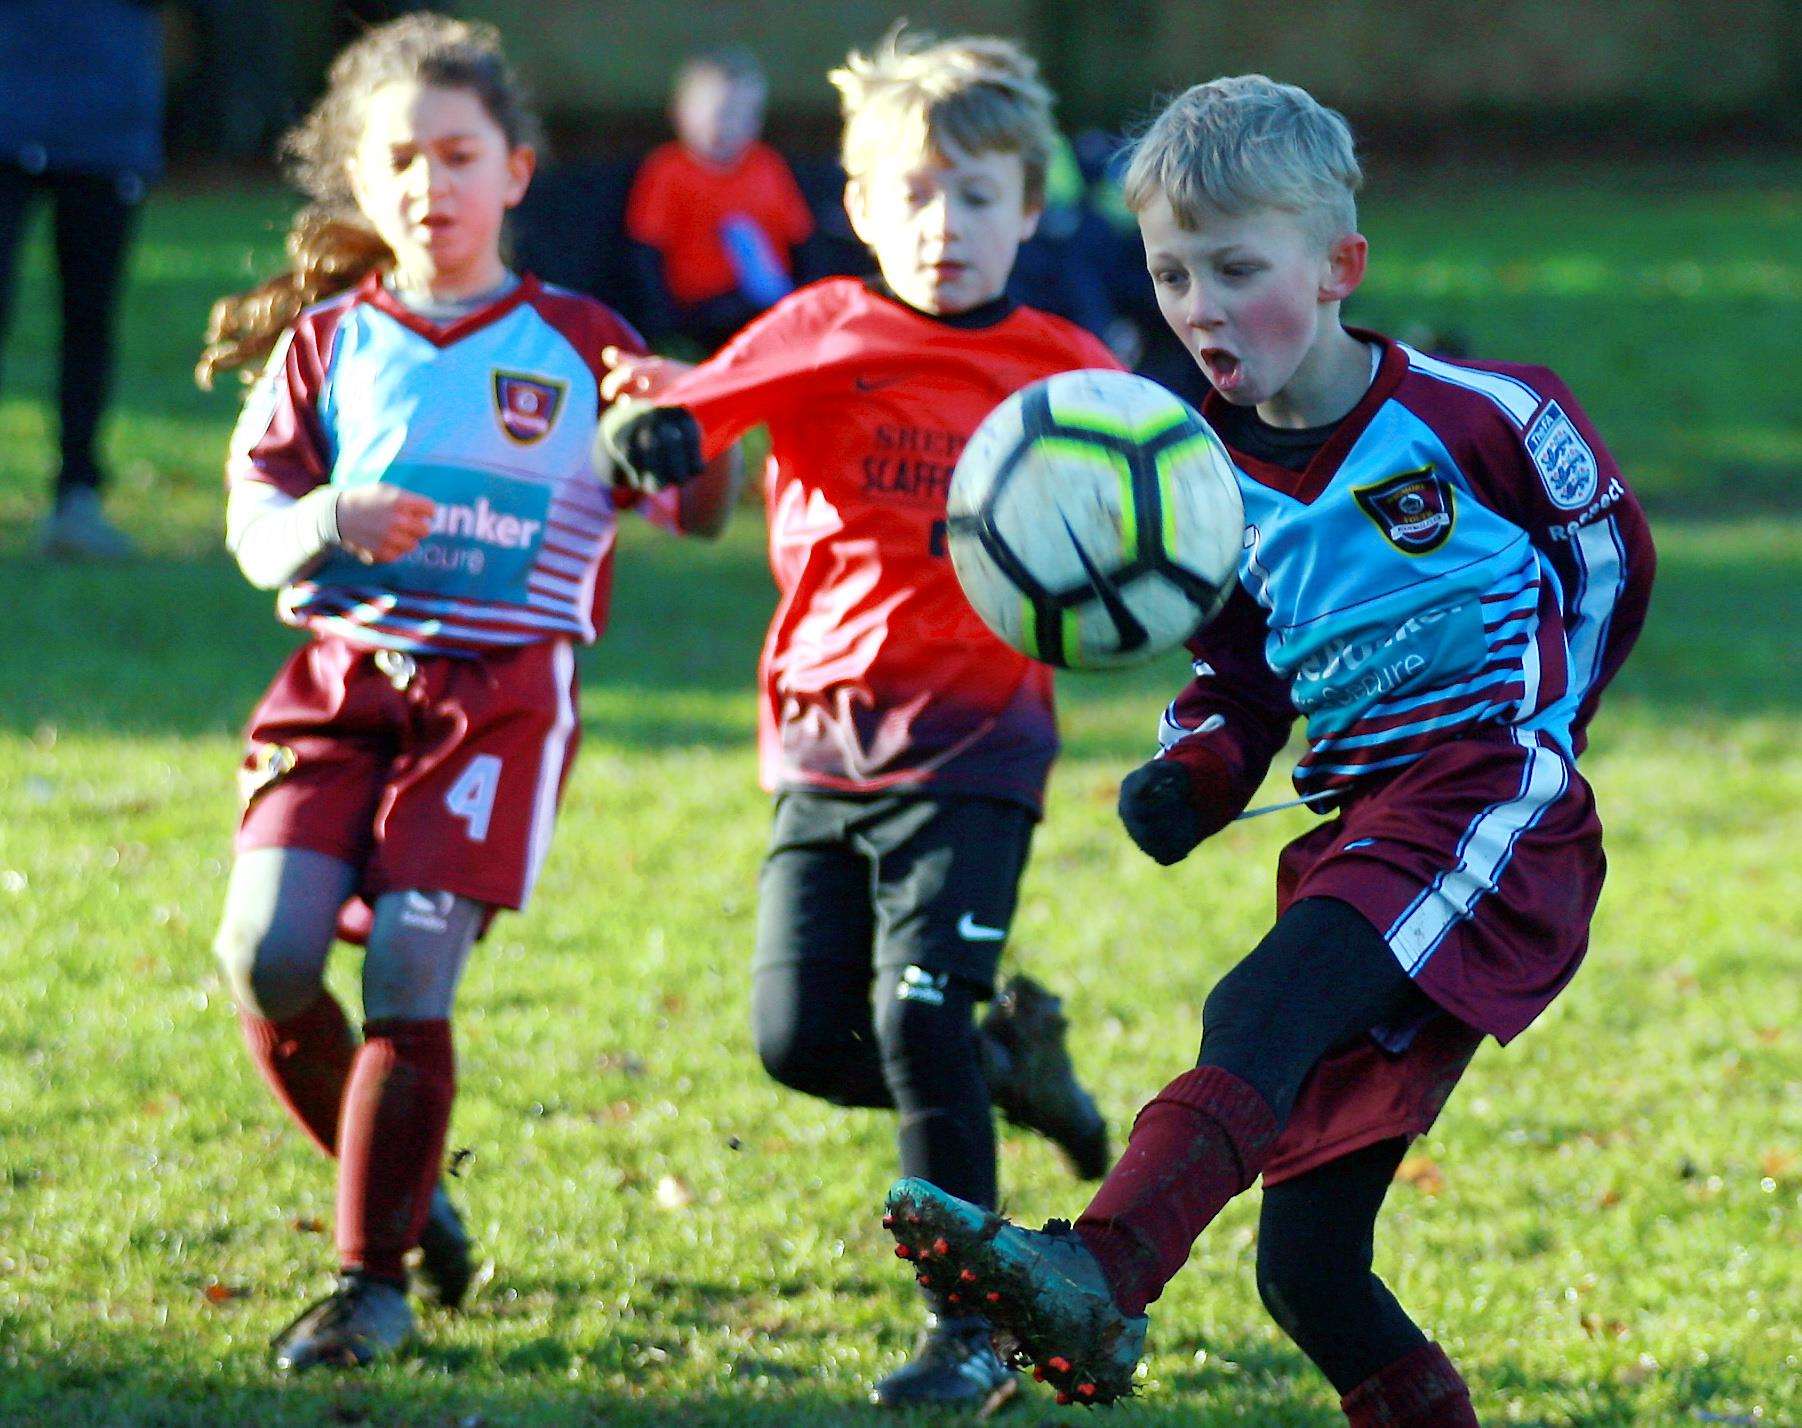 Wigmore Youth Wanderers under-8s (claret) go head-to-head with Sheerness East Youth Picture: Phil Lee